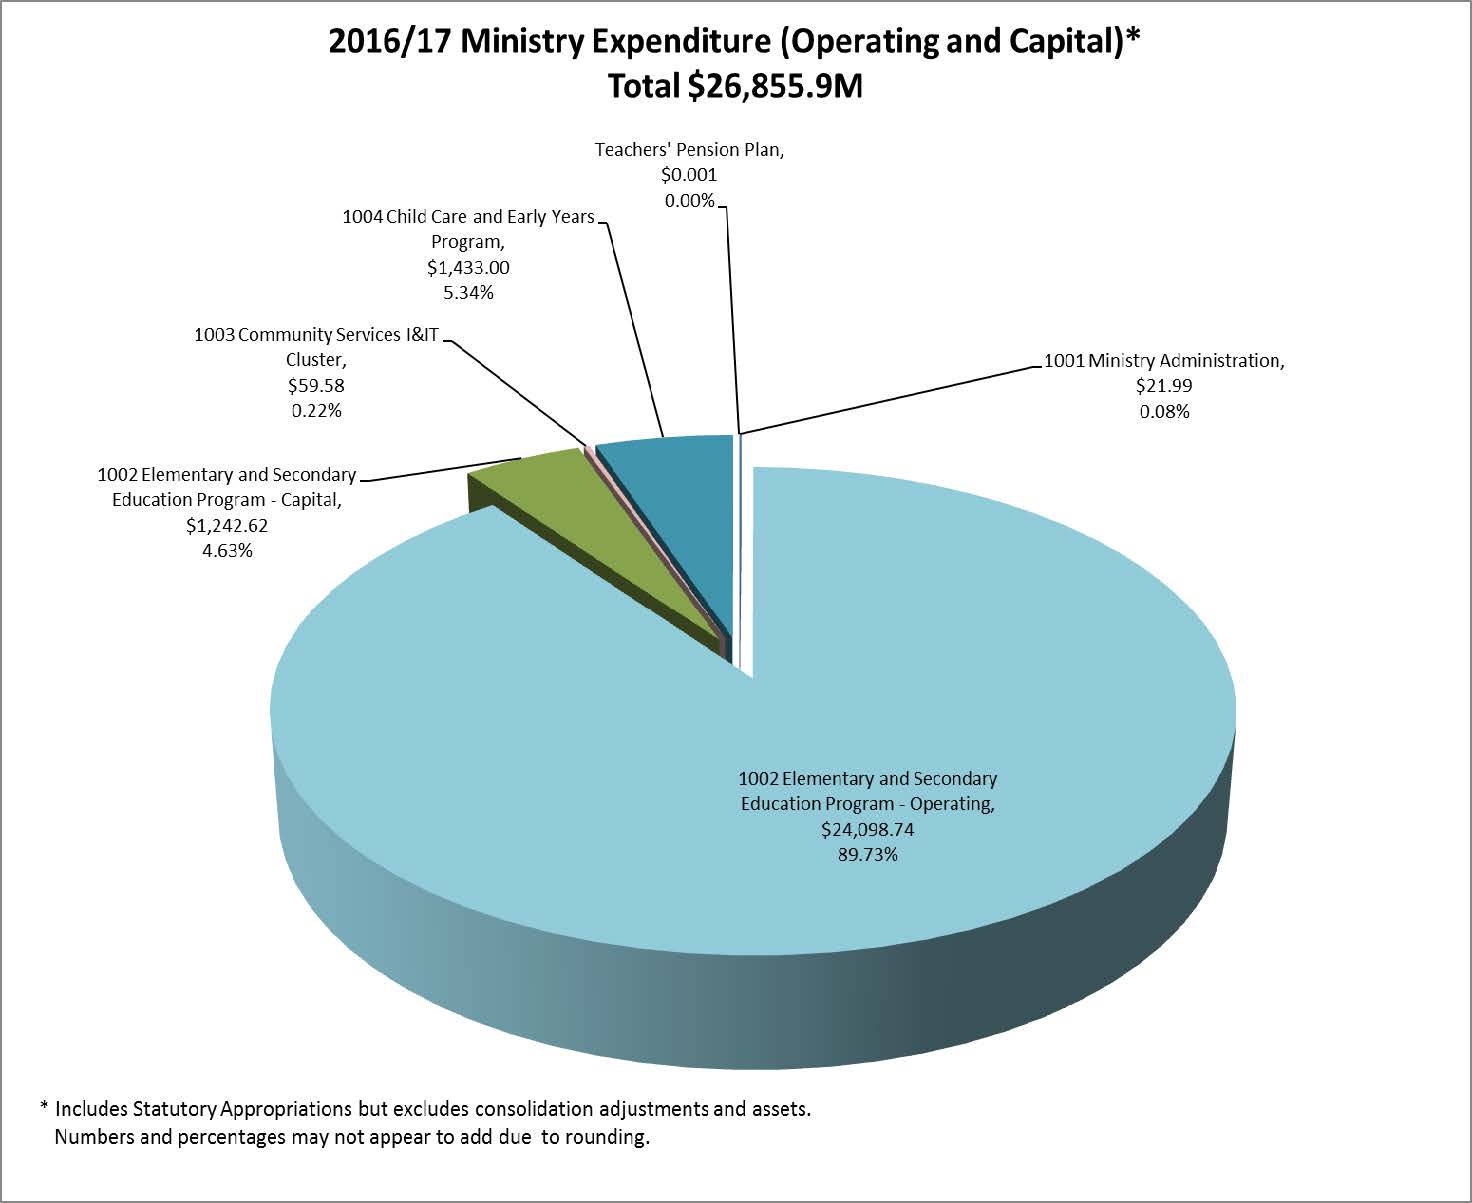  Pie Chart: 1002 Elementary and Secondary Education Program - Capital $1,242.62, 4.63%; 1003 Community Services I and IT Cluster $59.58, 0.22%; 1004 Child Care and Early Years Programs $1,433.00, 5.34%; Teachers' Pension Plan $0.001, 0.00%; 1001 Ministry Administration $21.99, 0.08%; 1002 Elementary and Secondary Education Program - Operating $24,098.74, 89.73%.